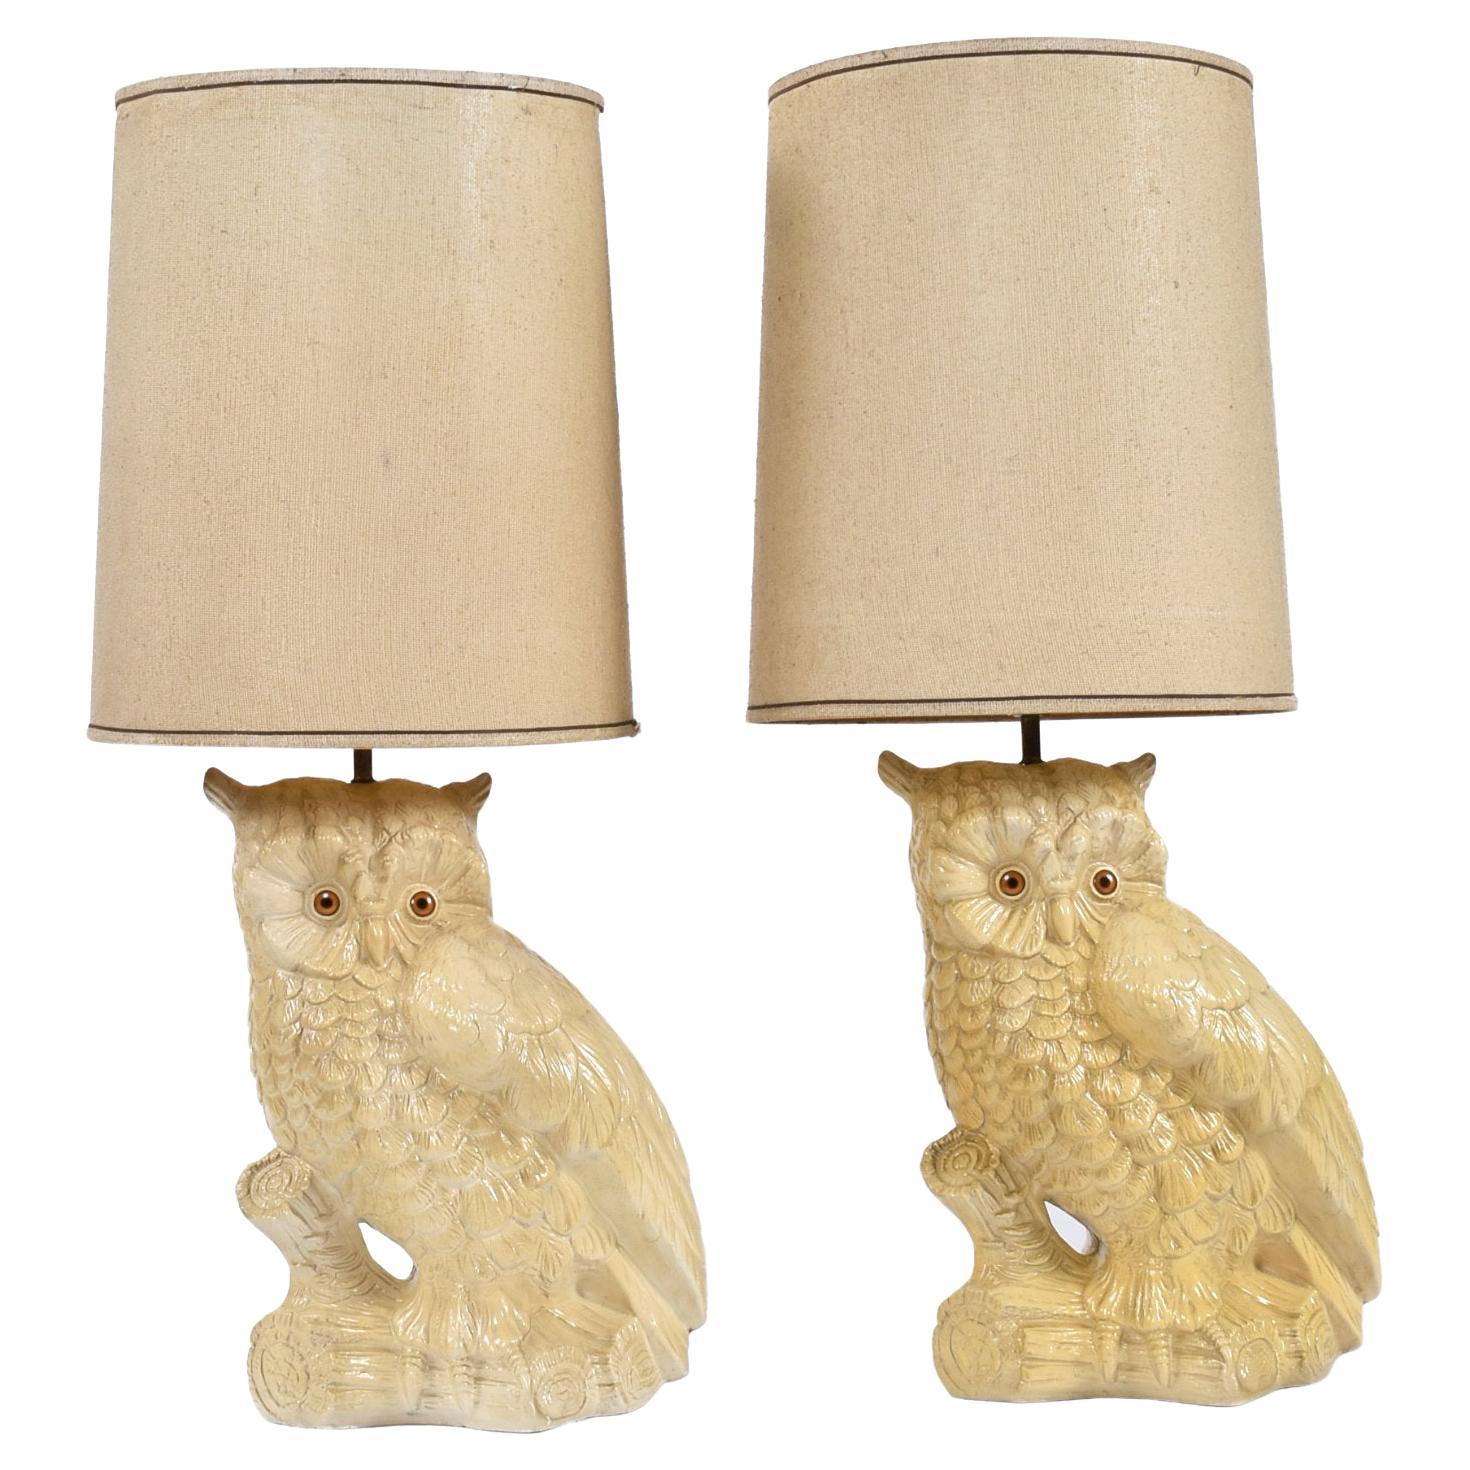 Pair of Mid-Century Large Antique White Owl Lamps with Original Shades For Sale